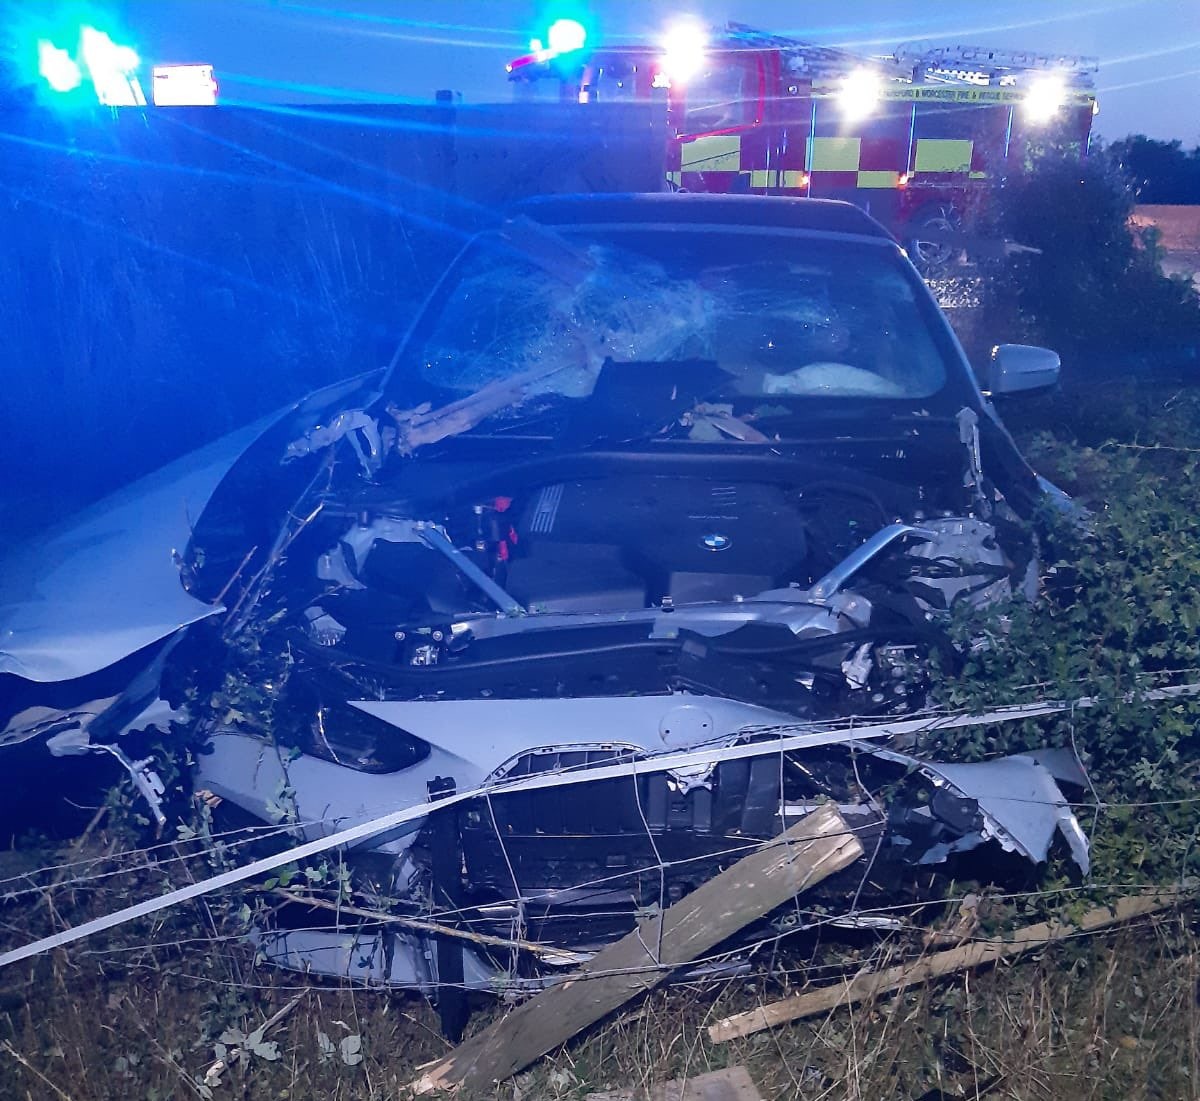 NEWS | Emergency services called to serious collision in the early hours of this morning